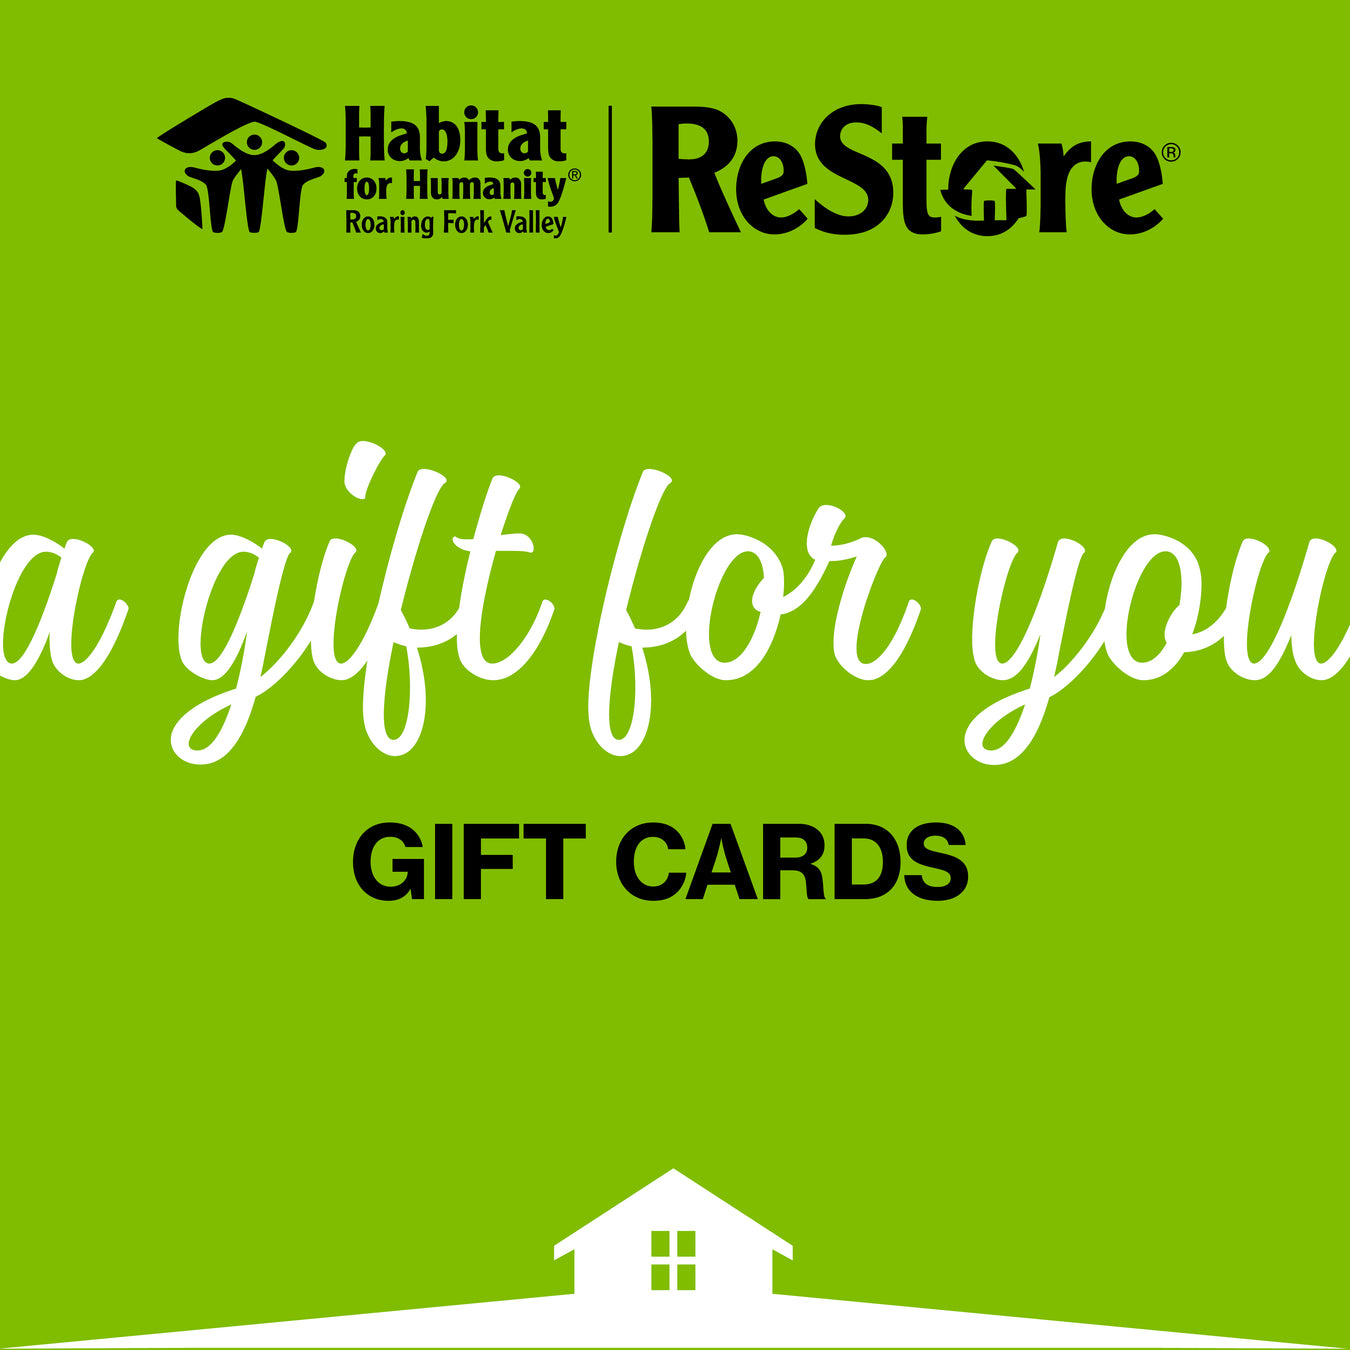 ReStore Gift Cards